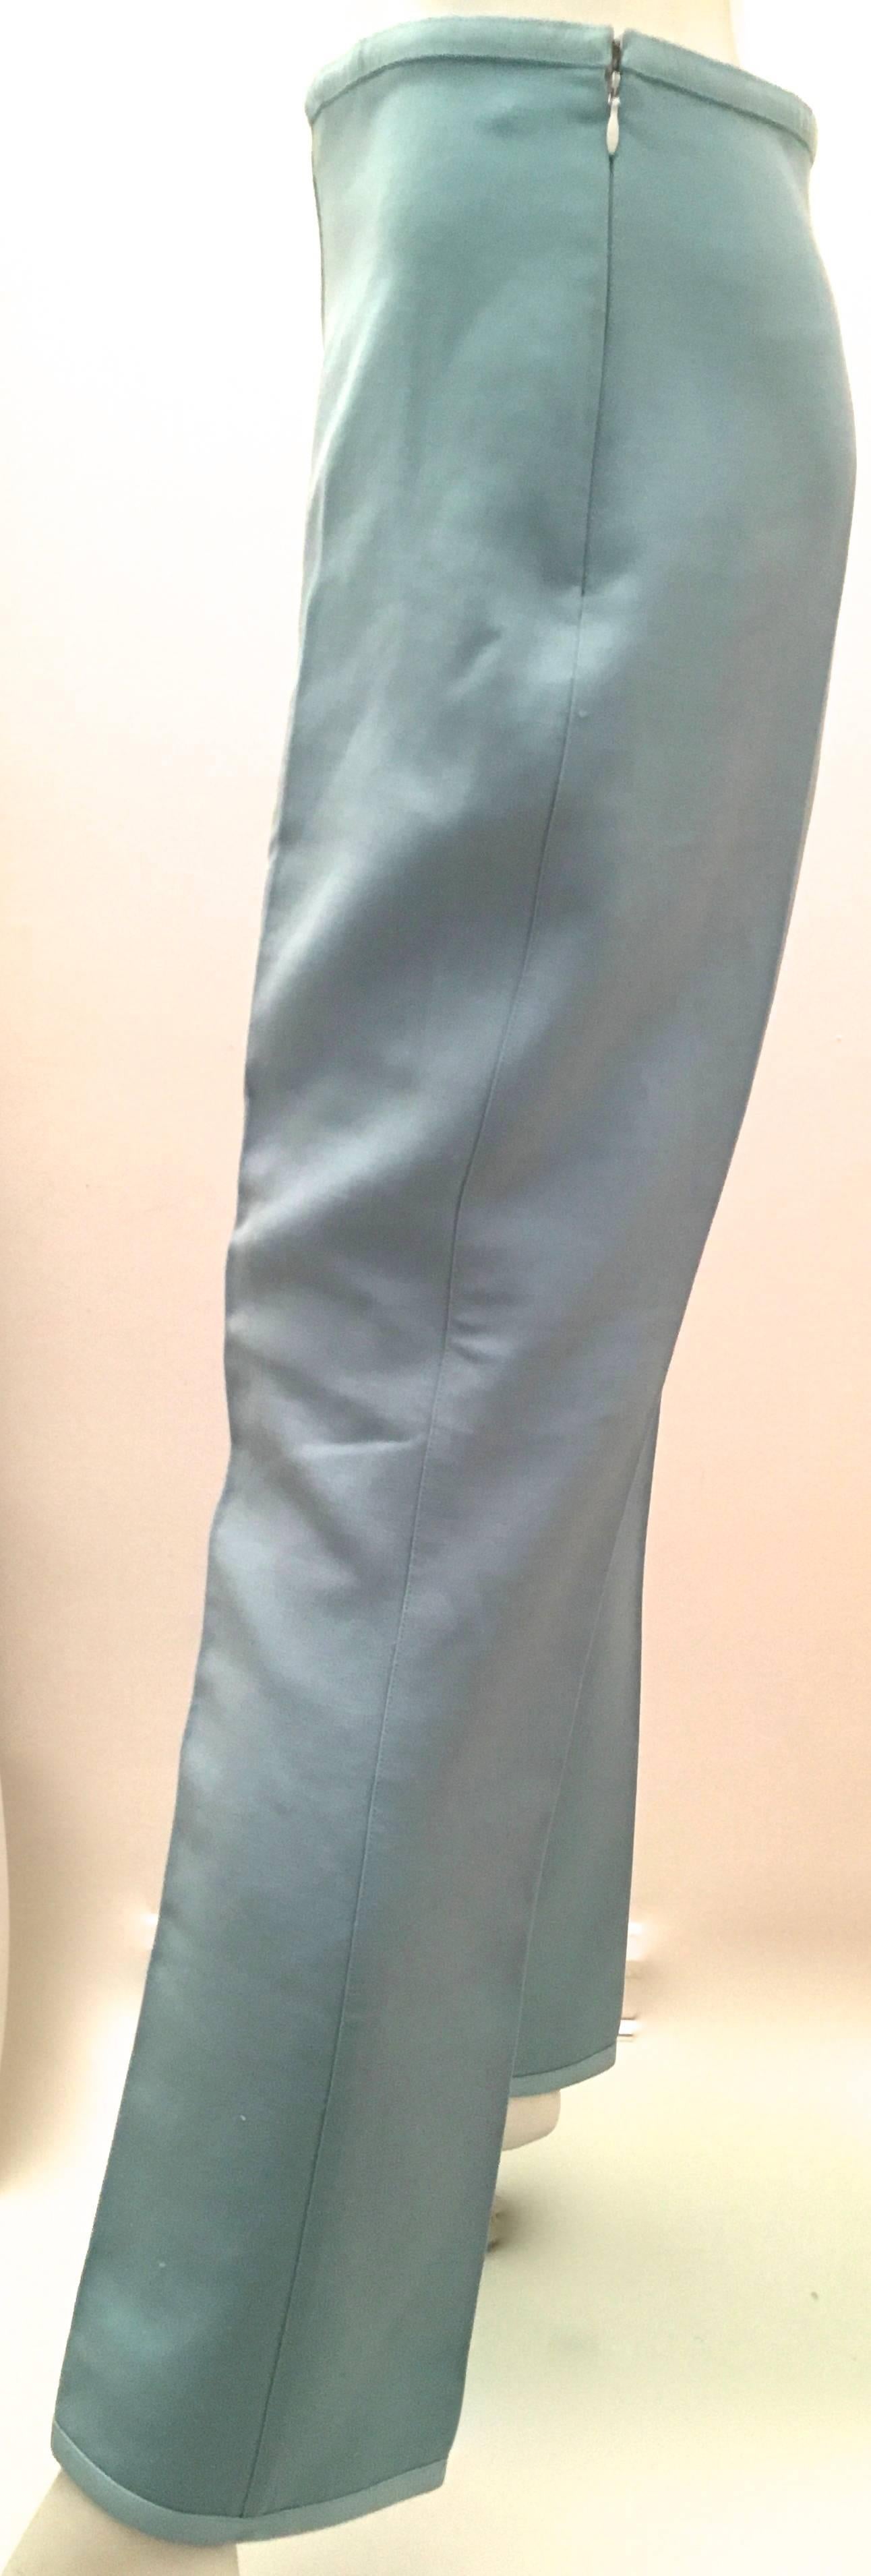 Presented here is a magnificent pair of pants from Courreges. The pants are probably from the 1980’s but the exact date is unknown. They are beautiful and trimmed in patent leather at the waist of the pants. The pants are a size 40 with a 30 inch